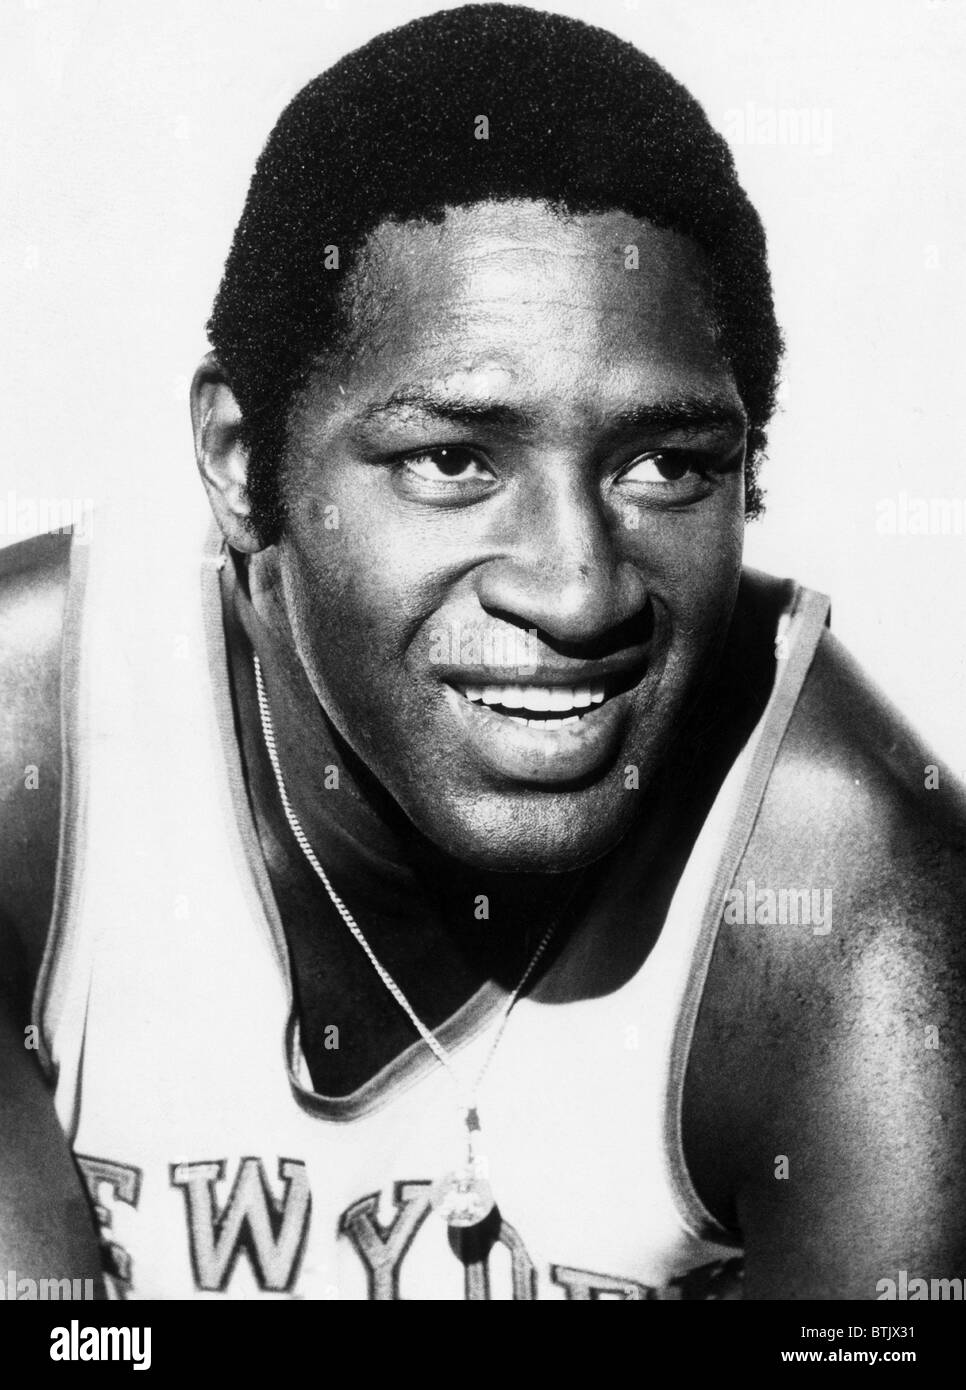 Willis Reed, American basketball player, circa 1974. CSU Archives/Courtesy Everett Collection Stock Photo